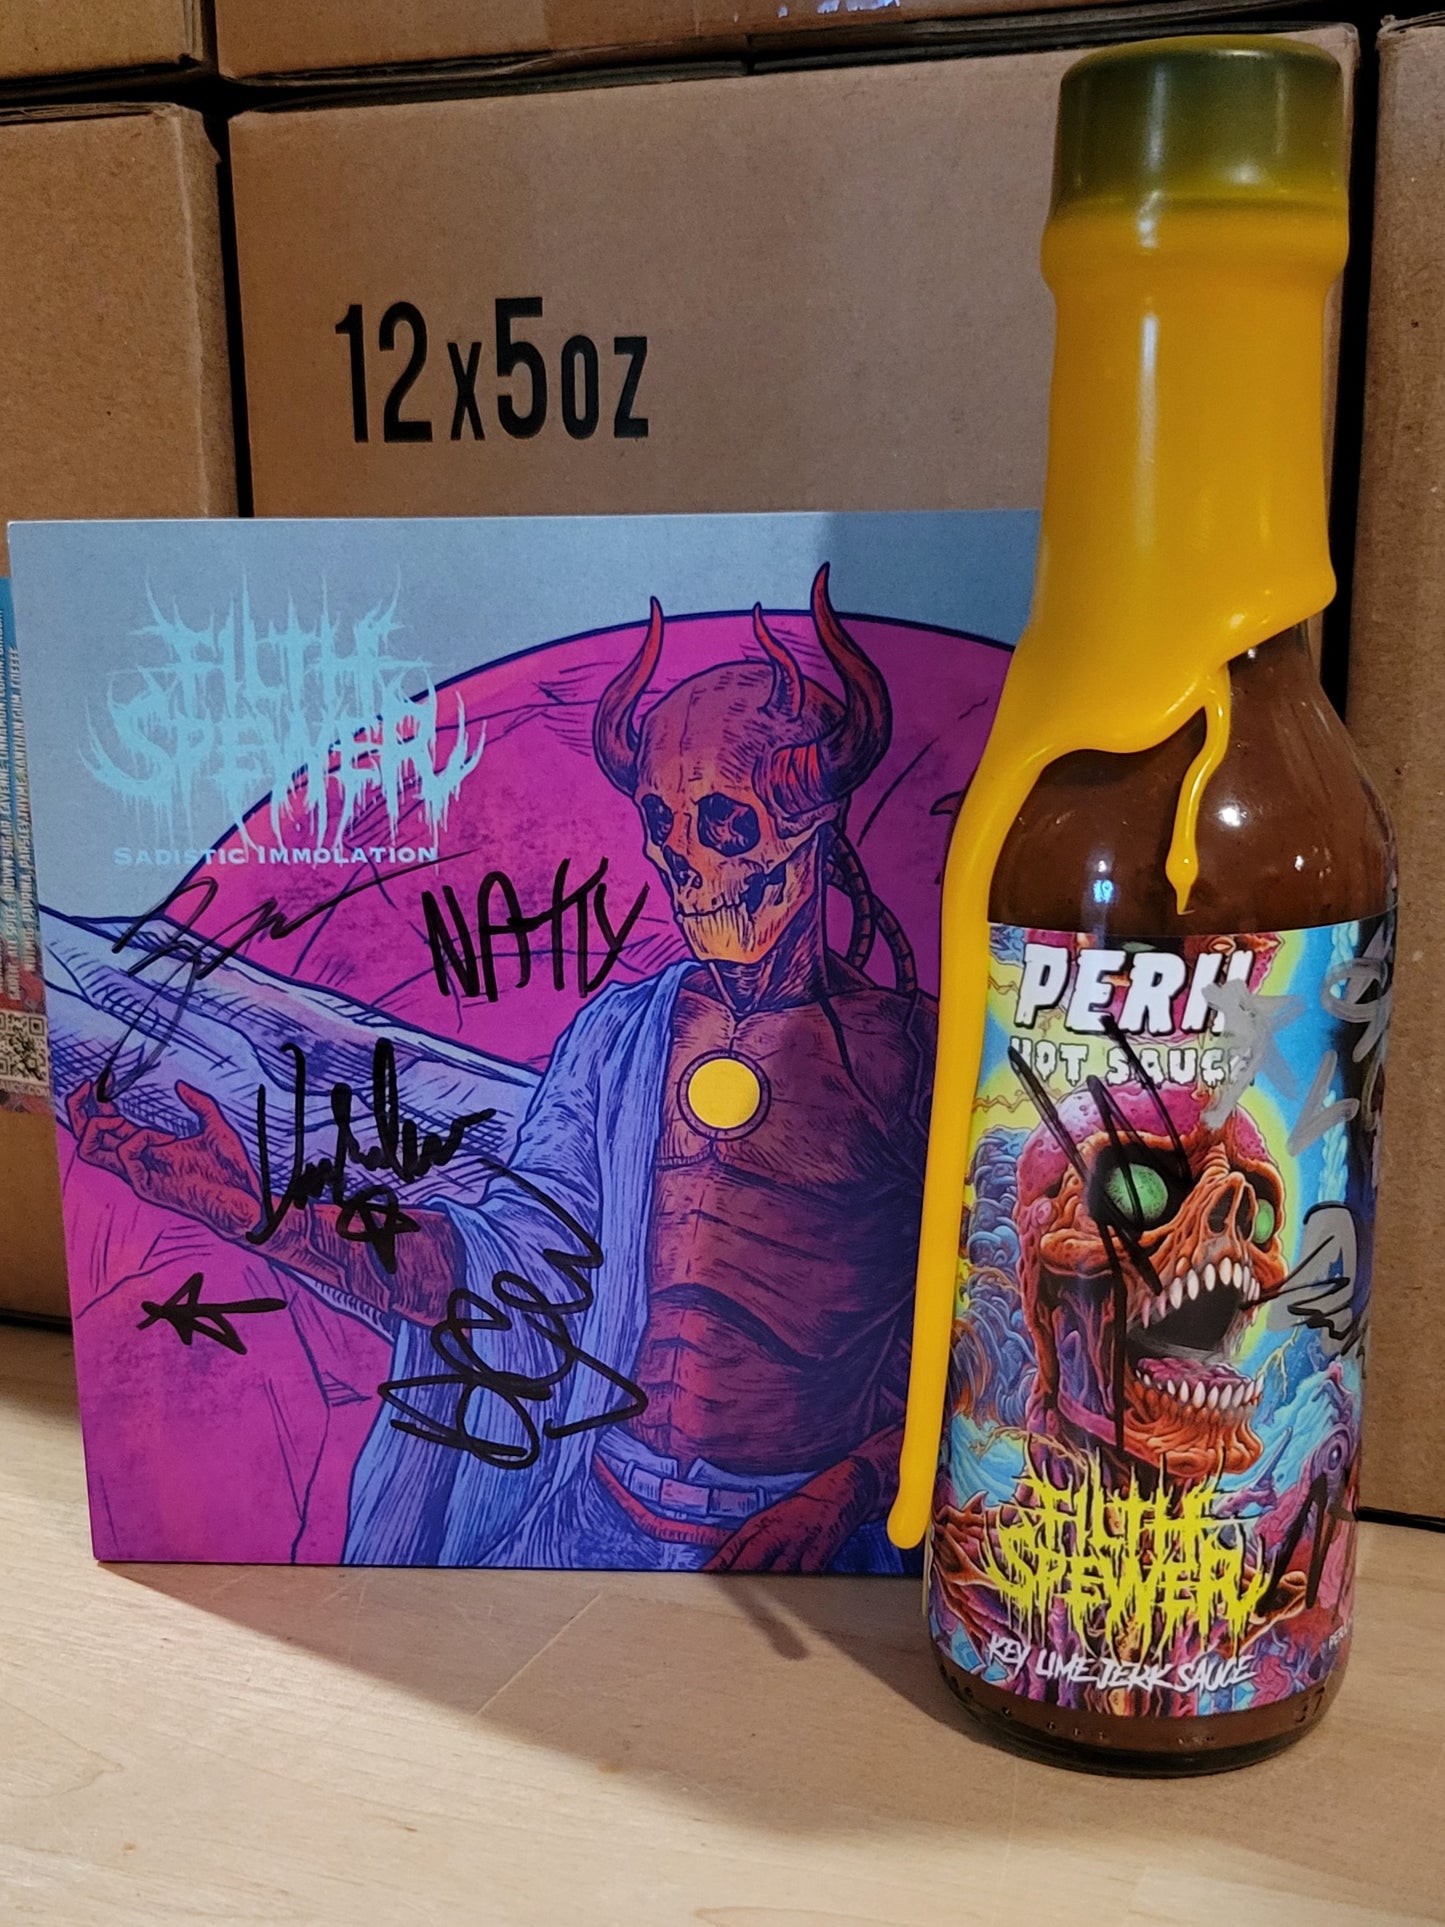 FILTH SPEWER Autographed CD & Special Edition wax dipped bottle set